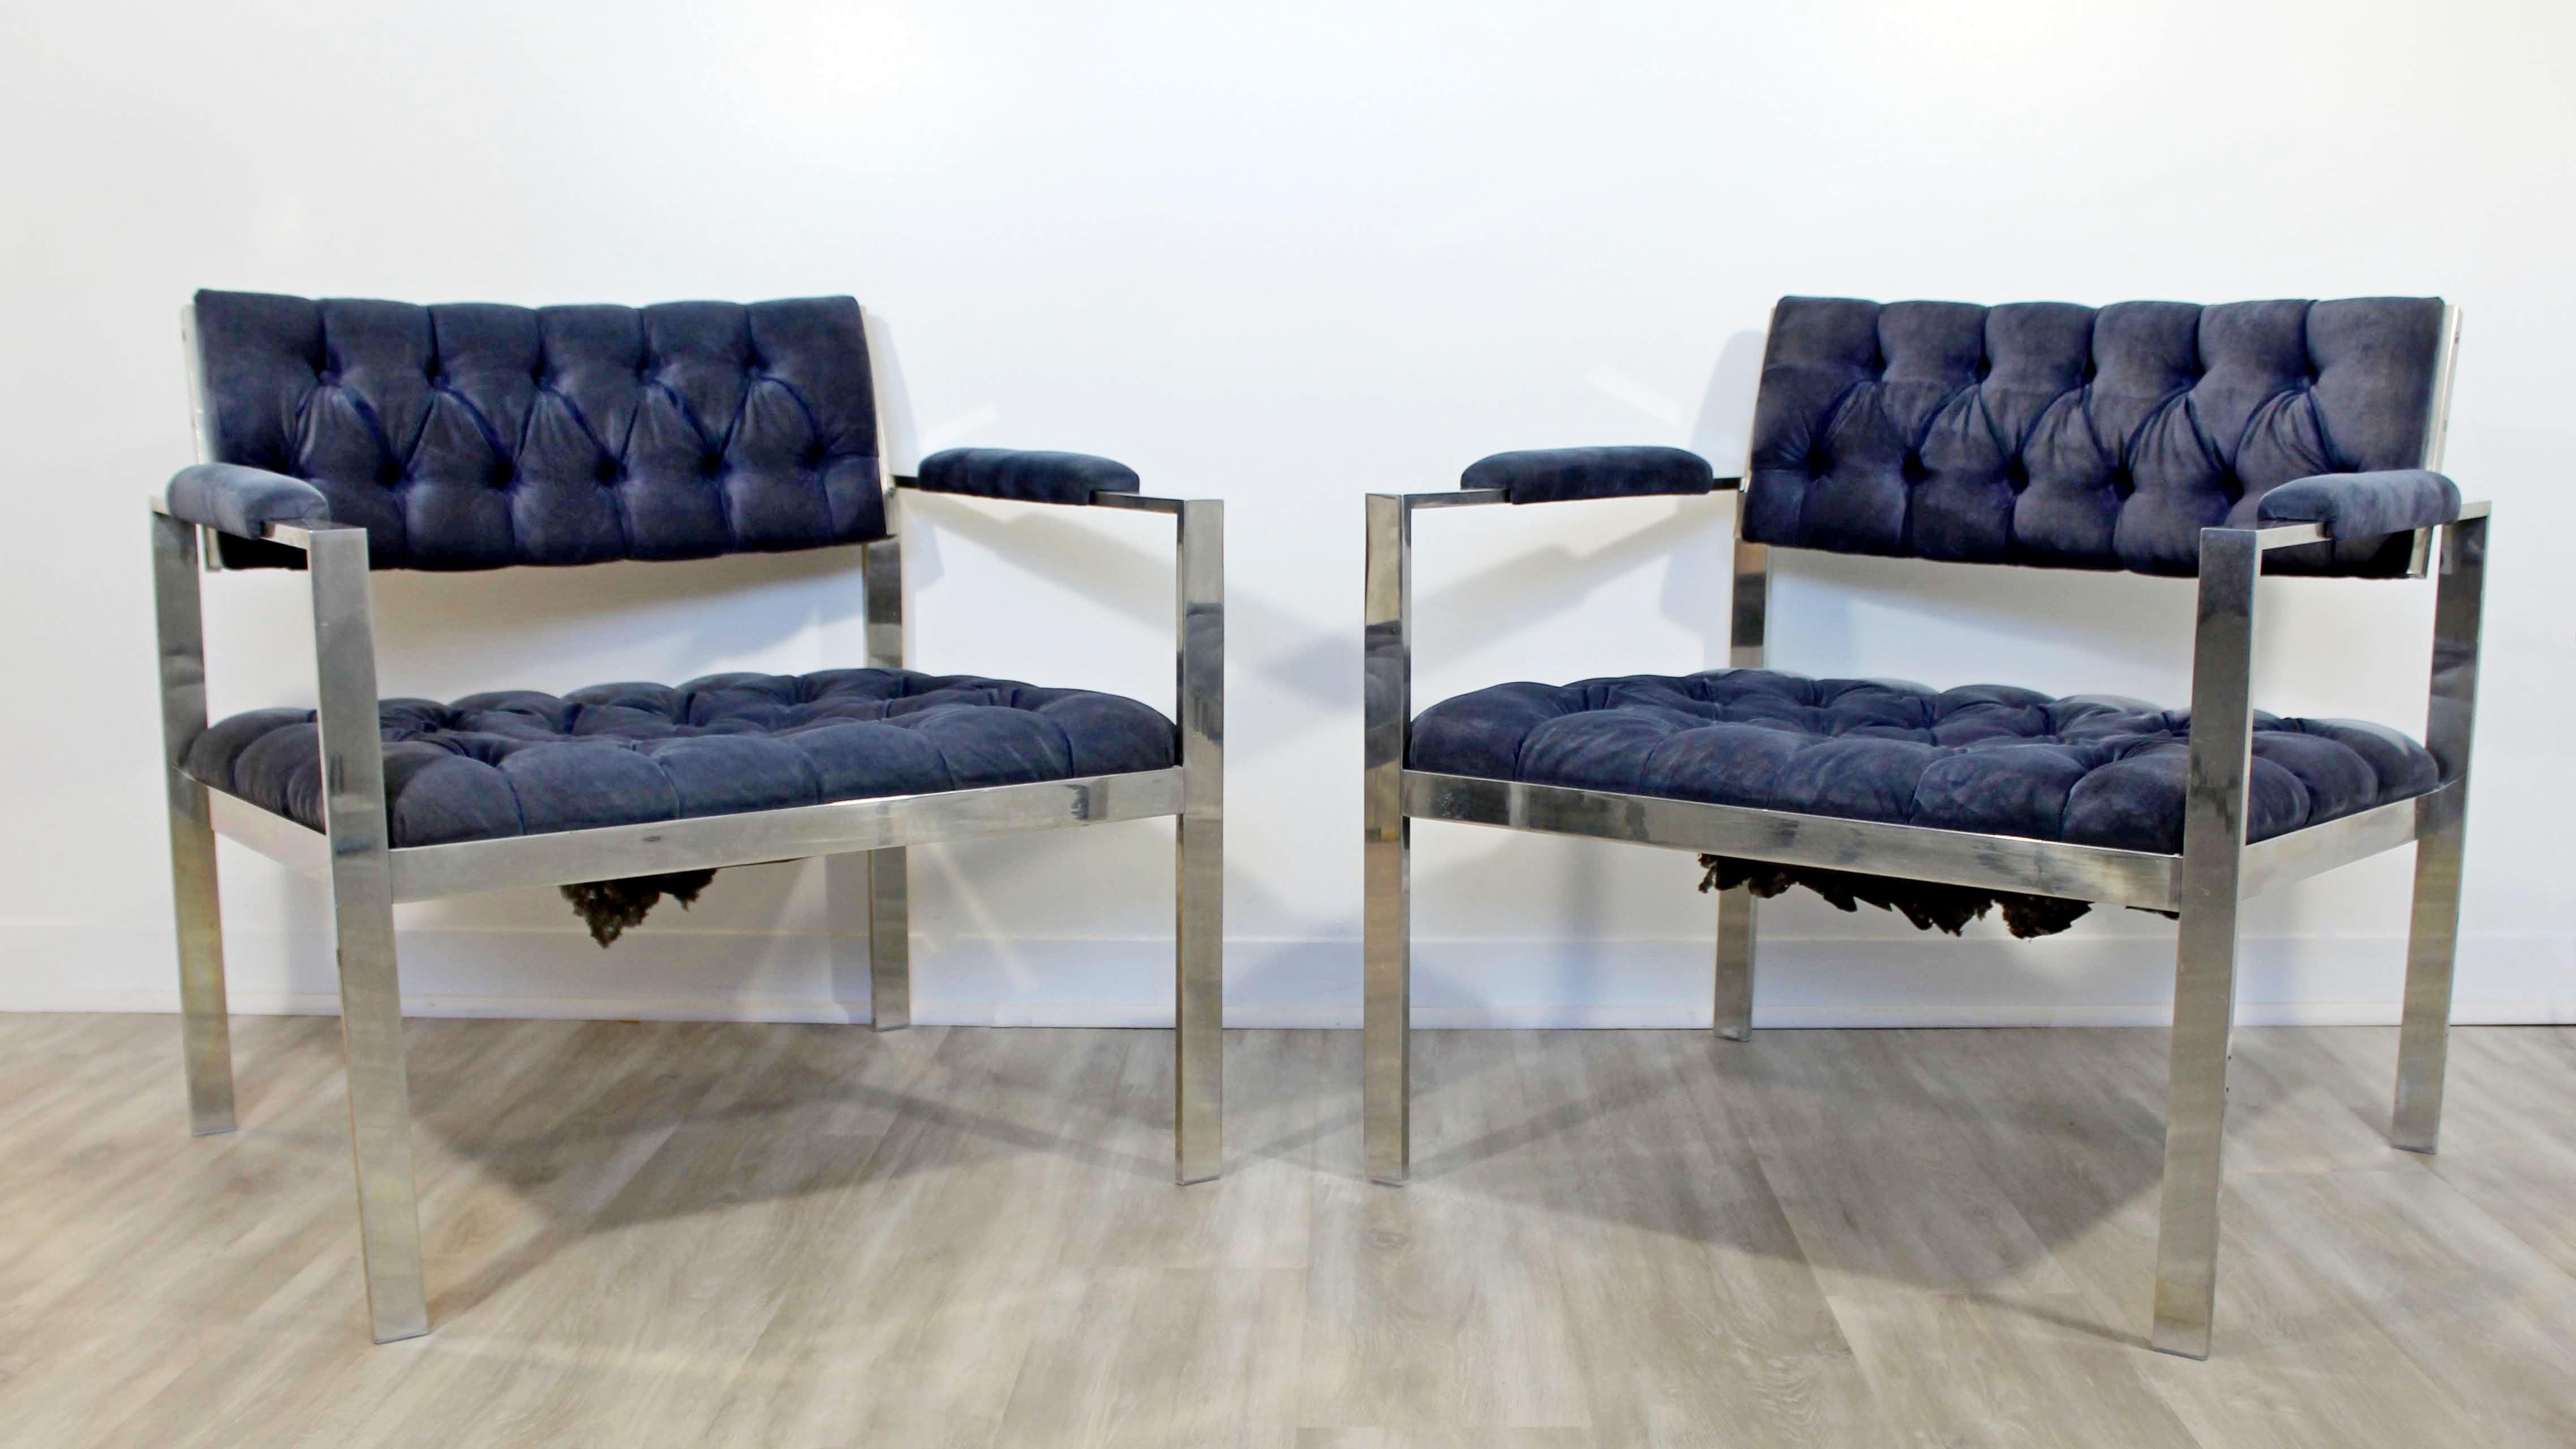 For your consideration are two timelessly classic, Harvey Probber chairs, with a tufted blue velvet upholstery on a chrome base, circa 1970s. In very good vintage condition, with some spots on the fabric. Their measurements are 29